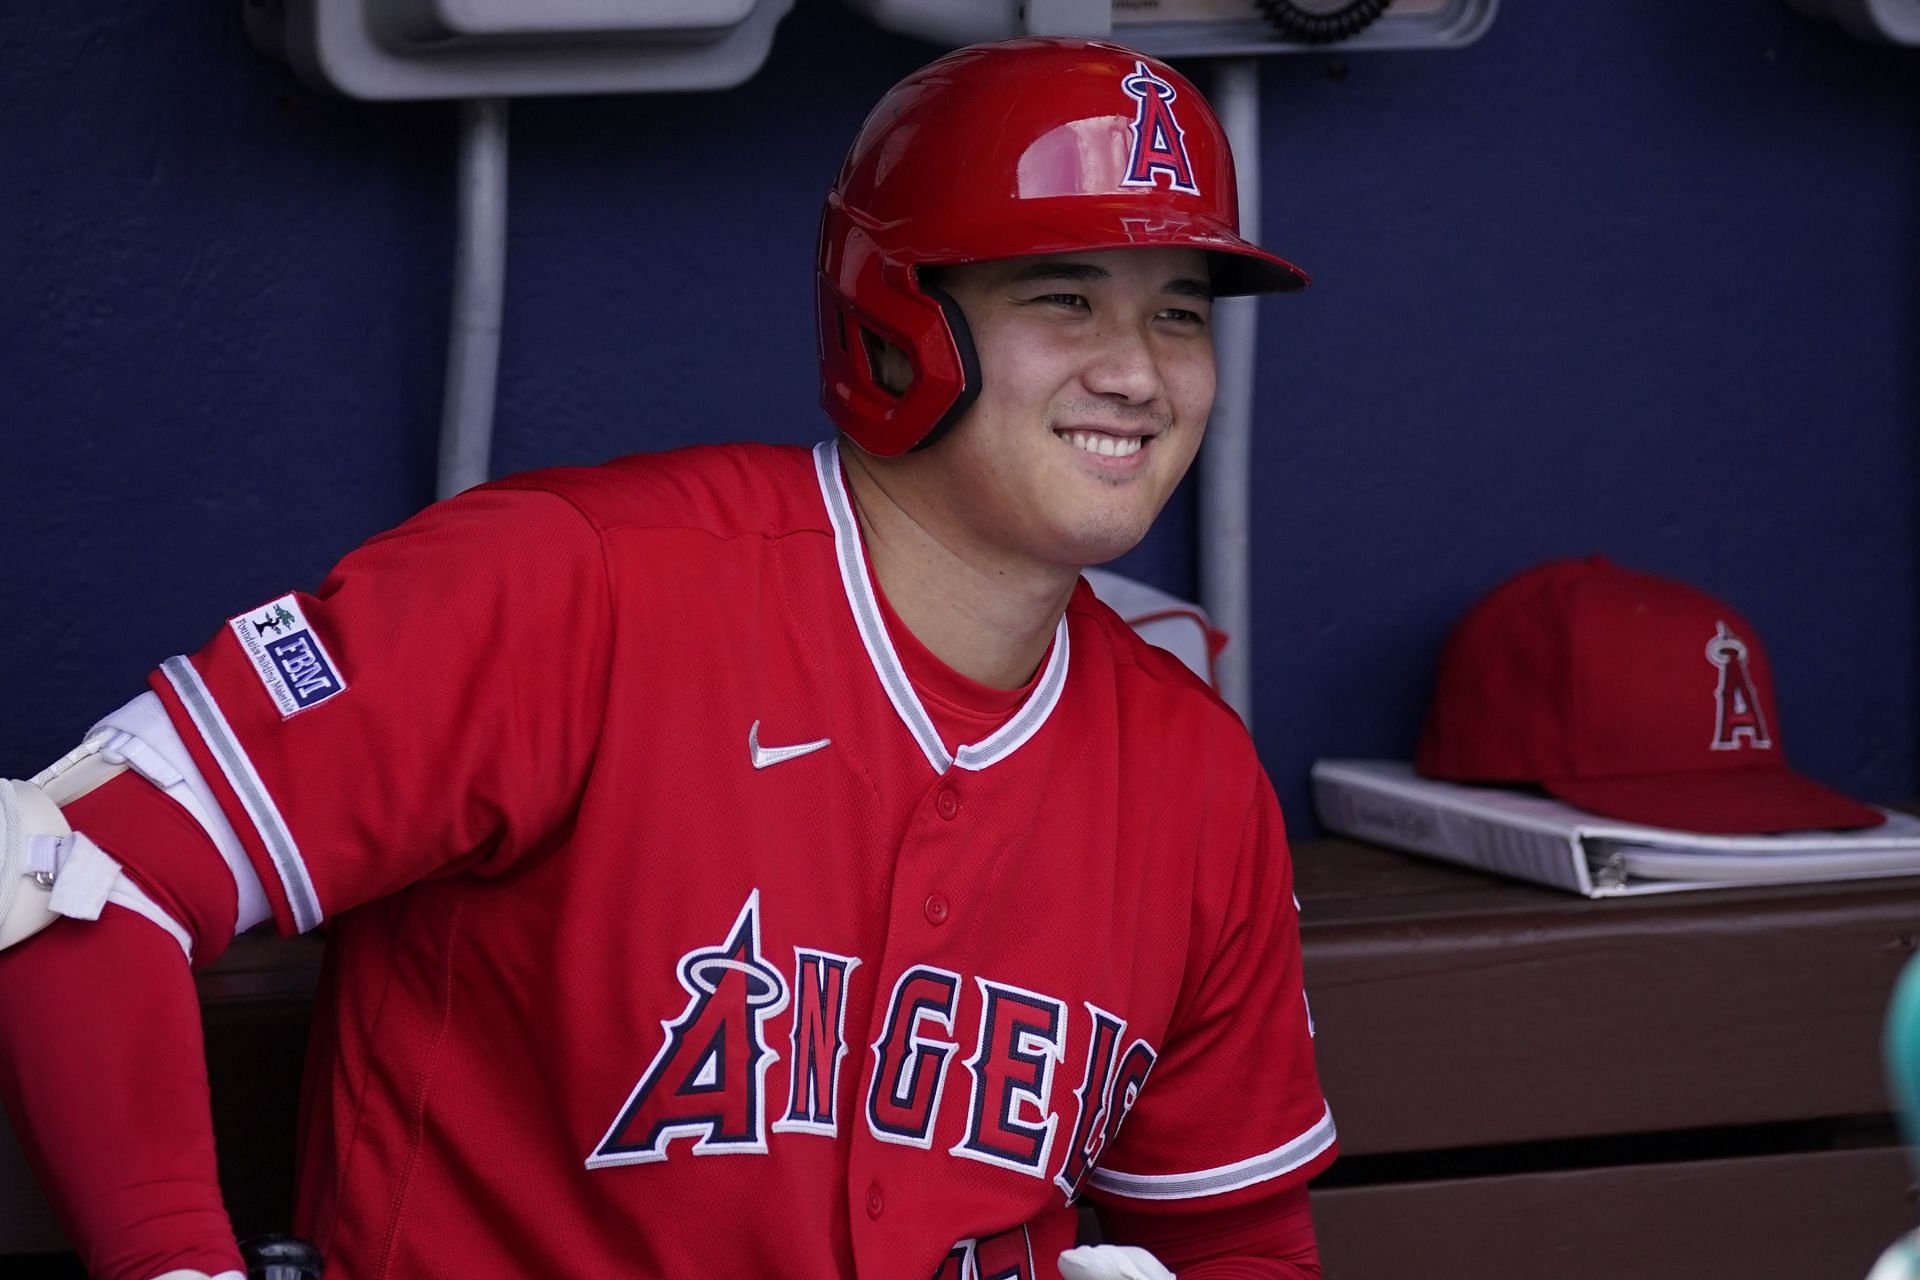 According to reports, three teams could be the most likely to sign Shohei Ohtani in free agency: The Dodgers, Giants, and Cubs.